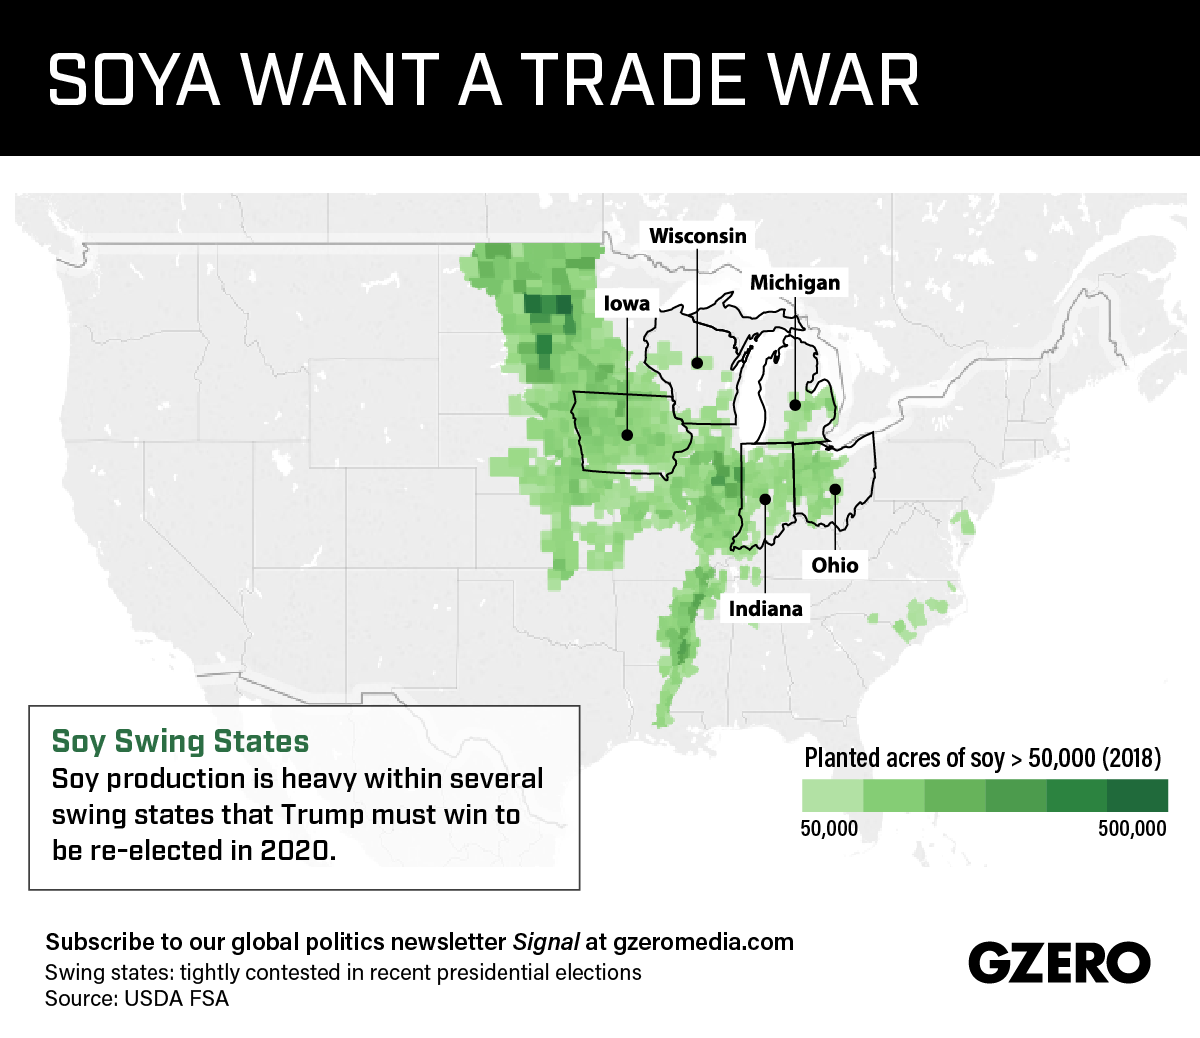 Graphic Truth: Soya Want a Trade War